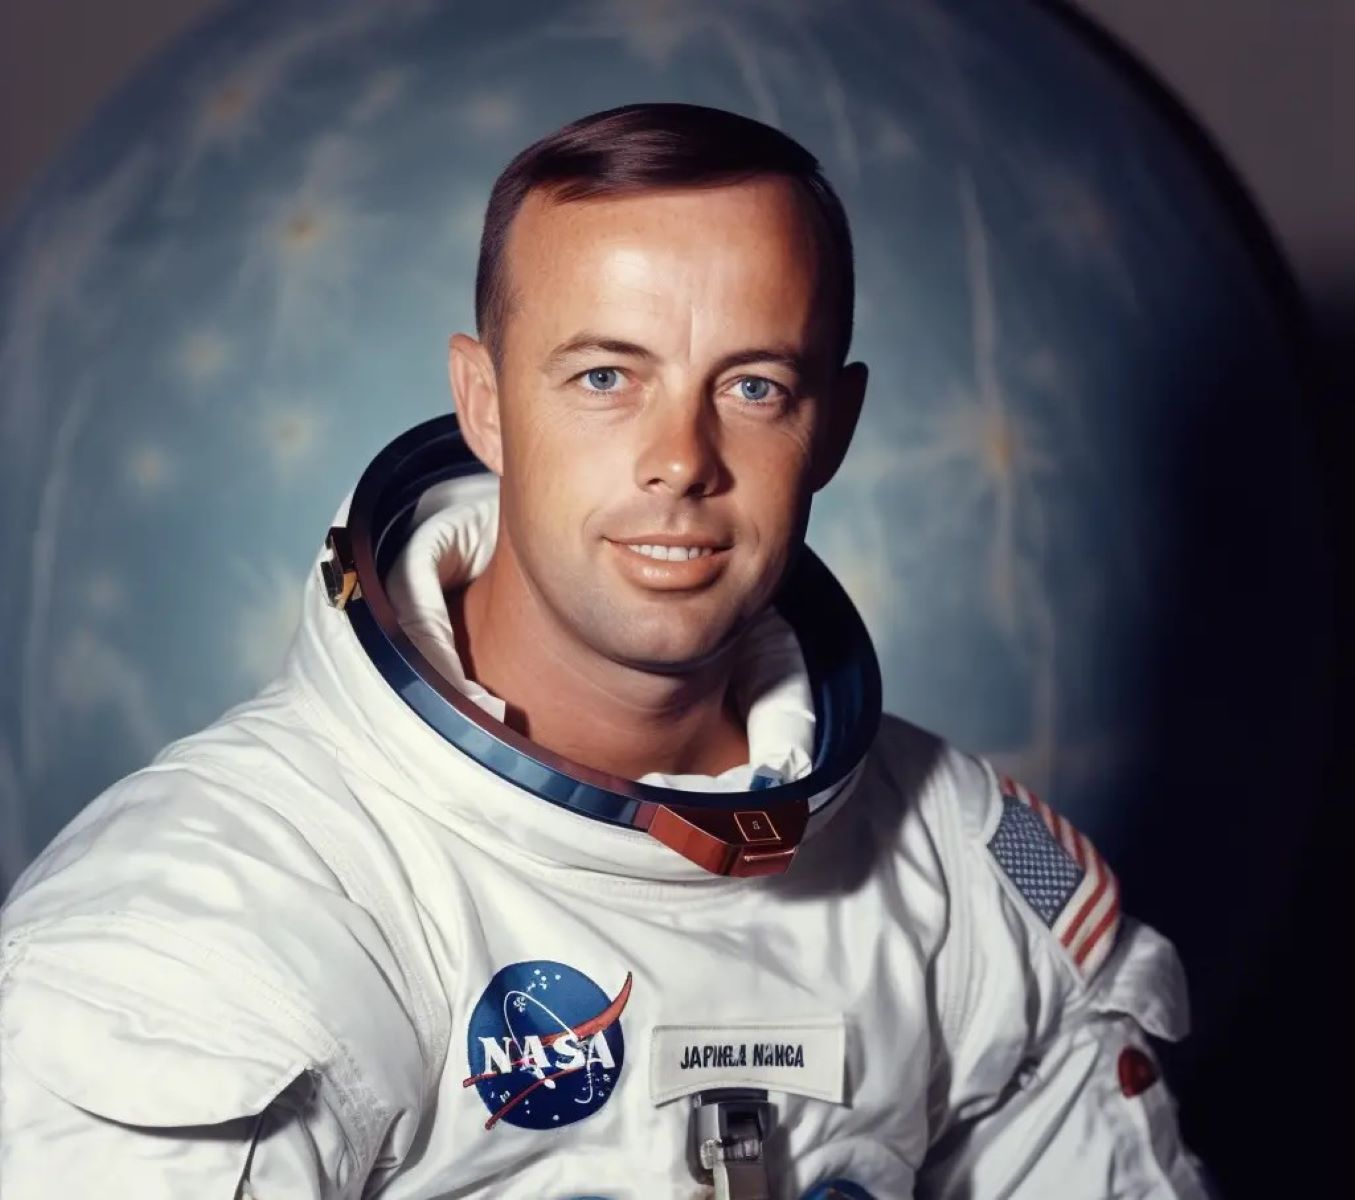 23 Extraordinary Facts About Alan Shepard - Facts.net